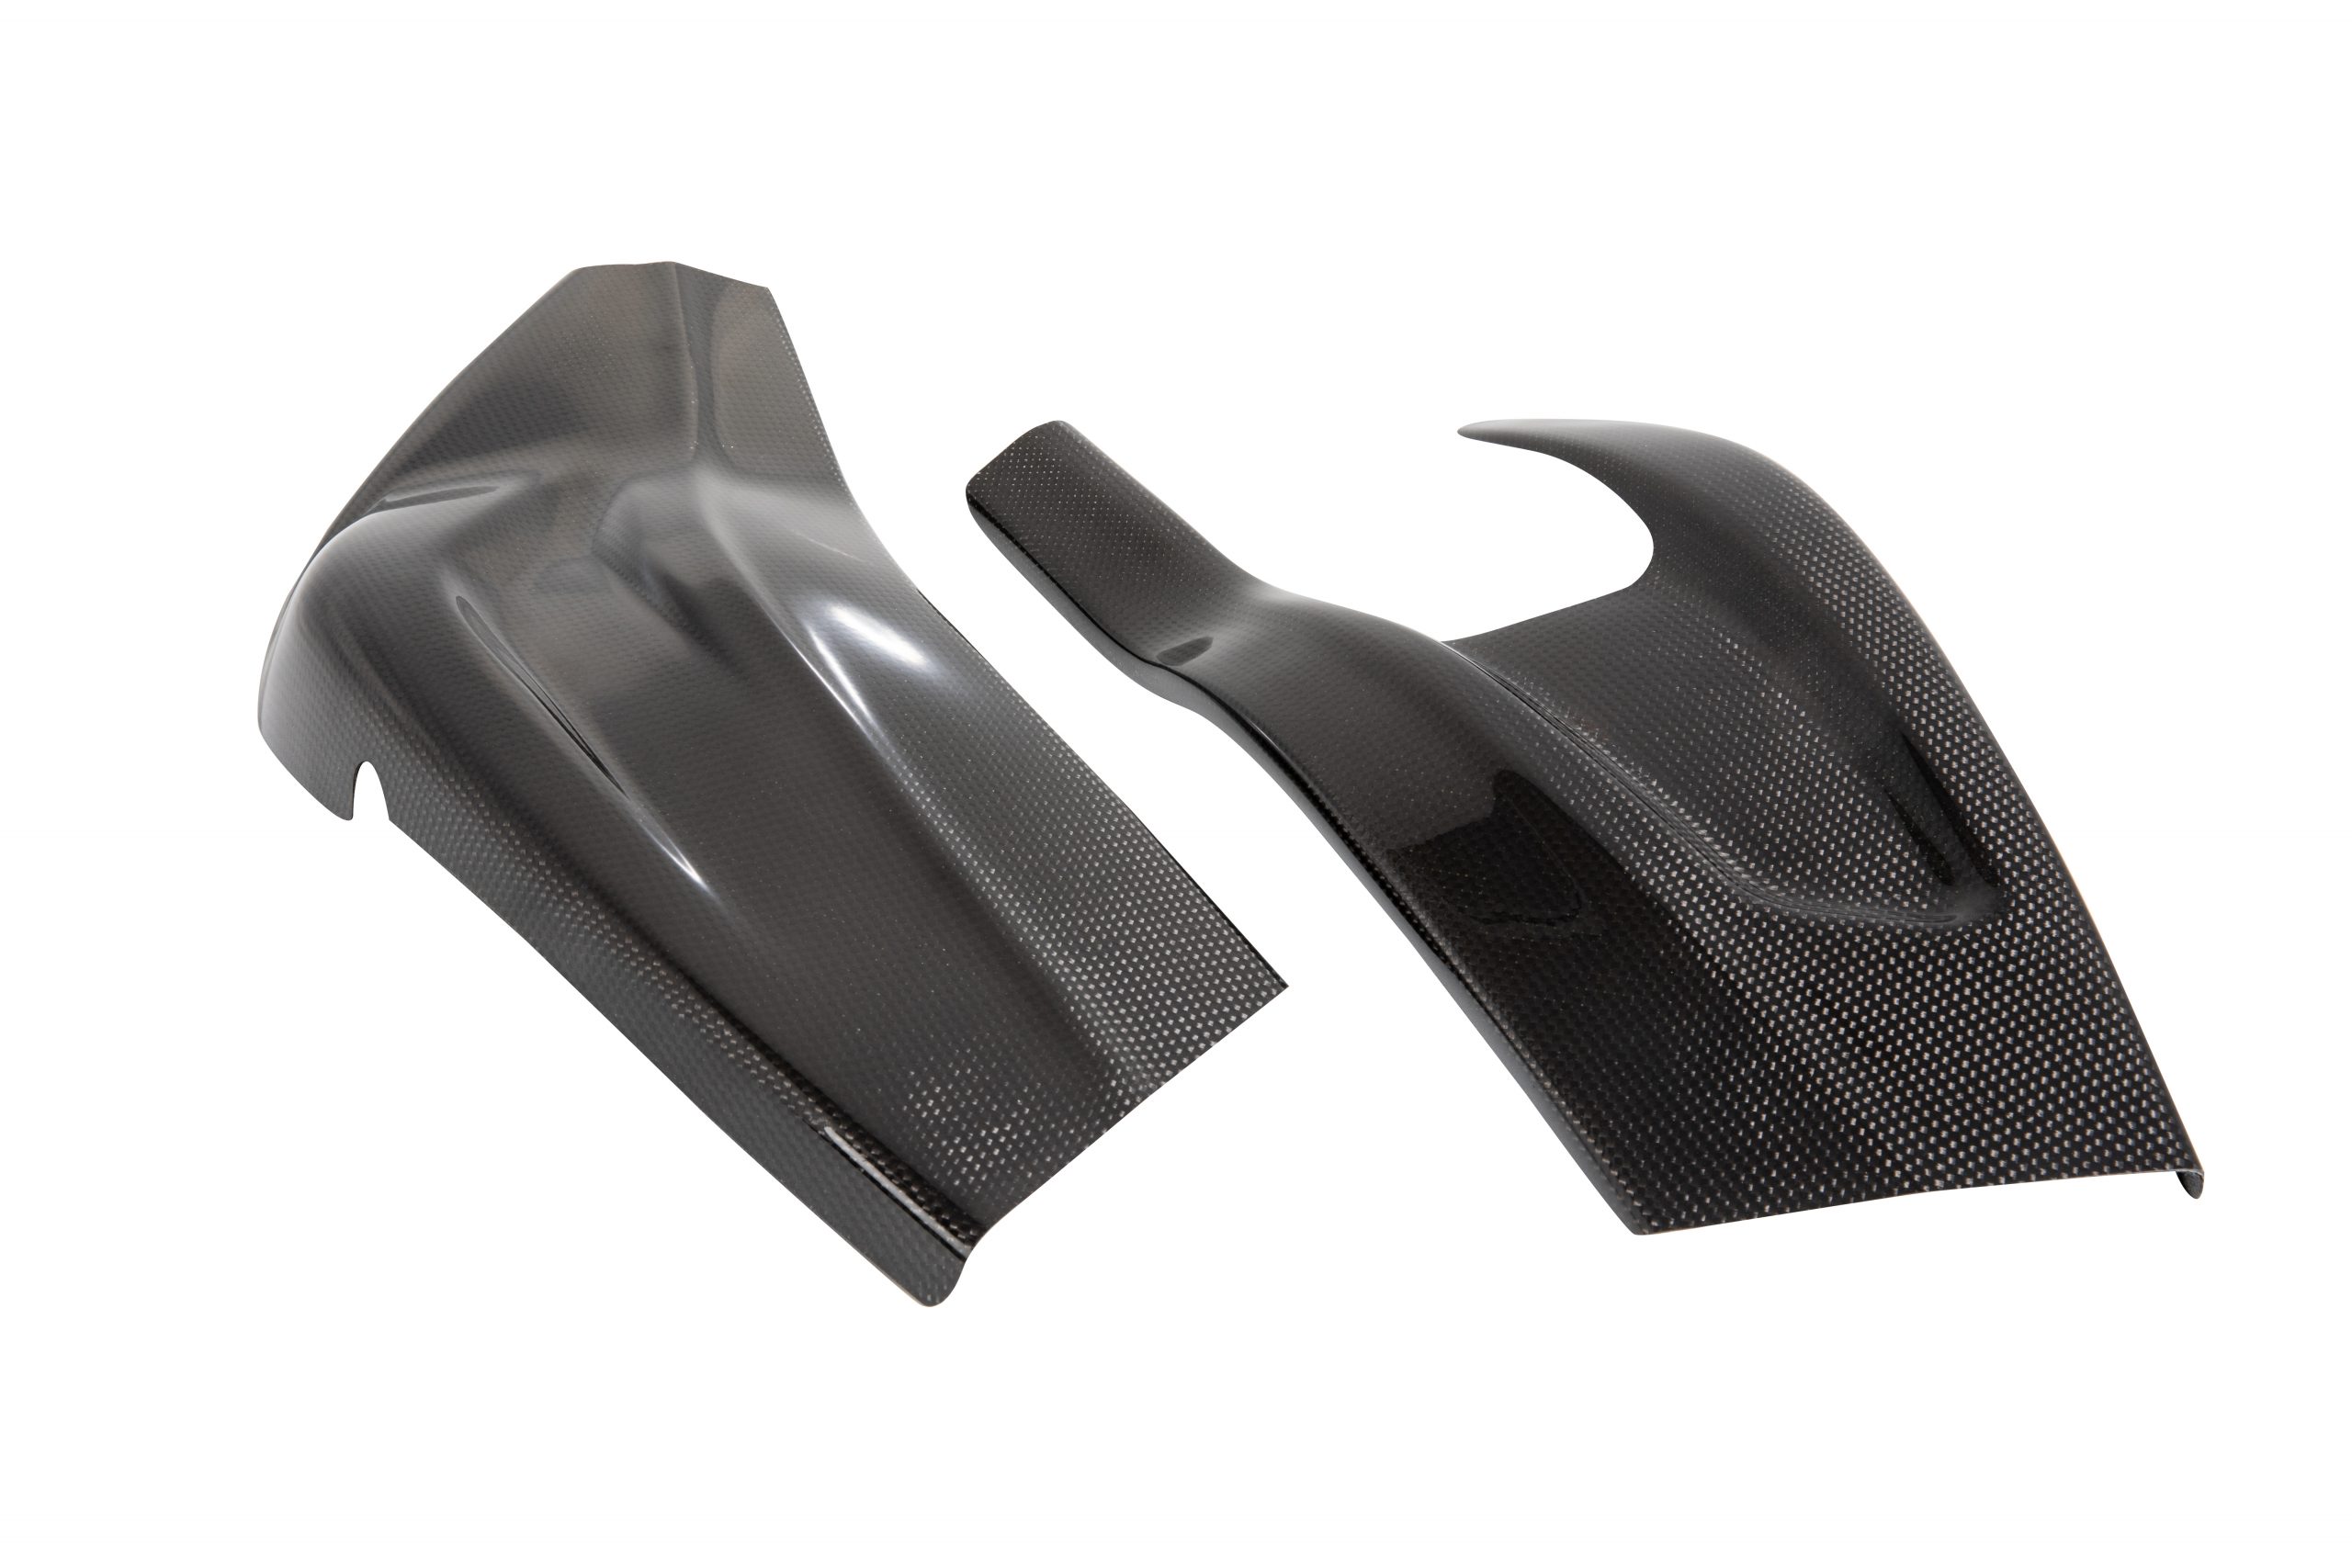 ARM PROTECTIONS BMW S1000RR (15-18)